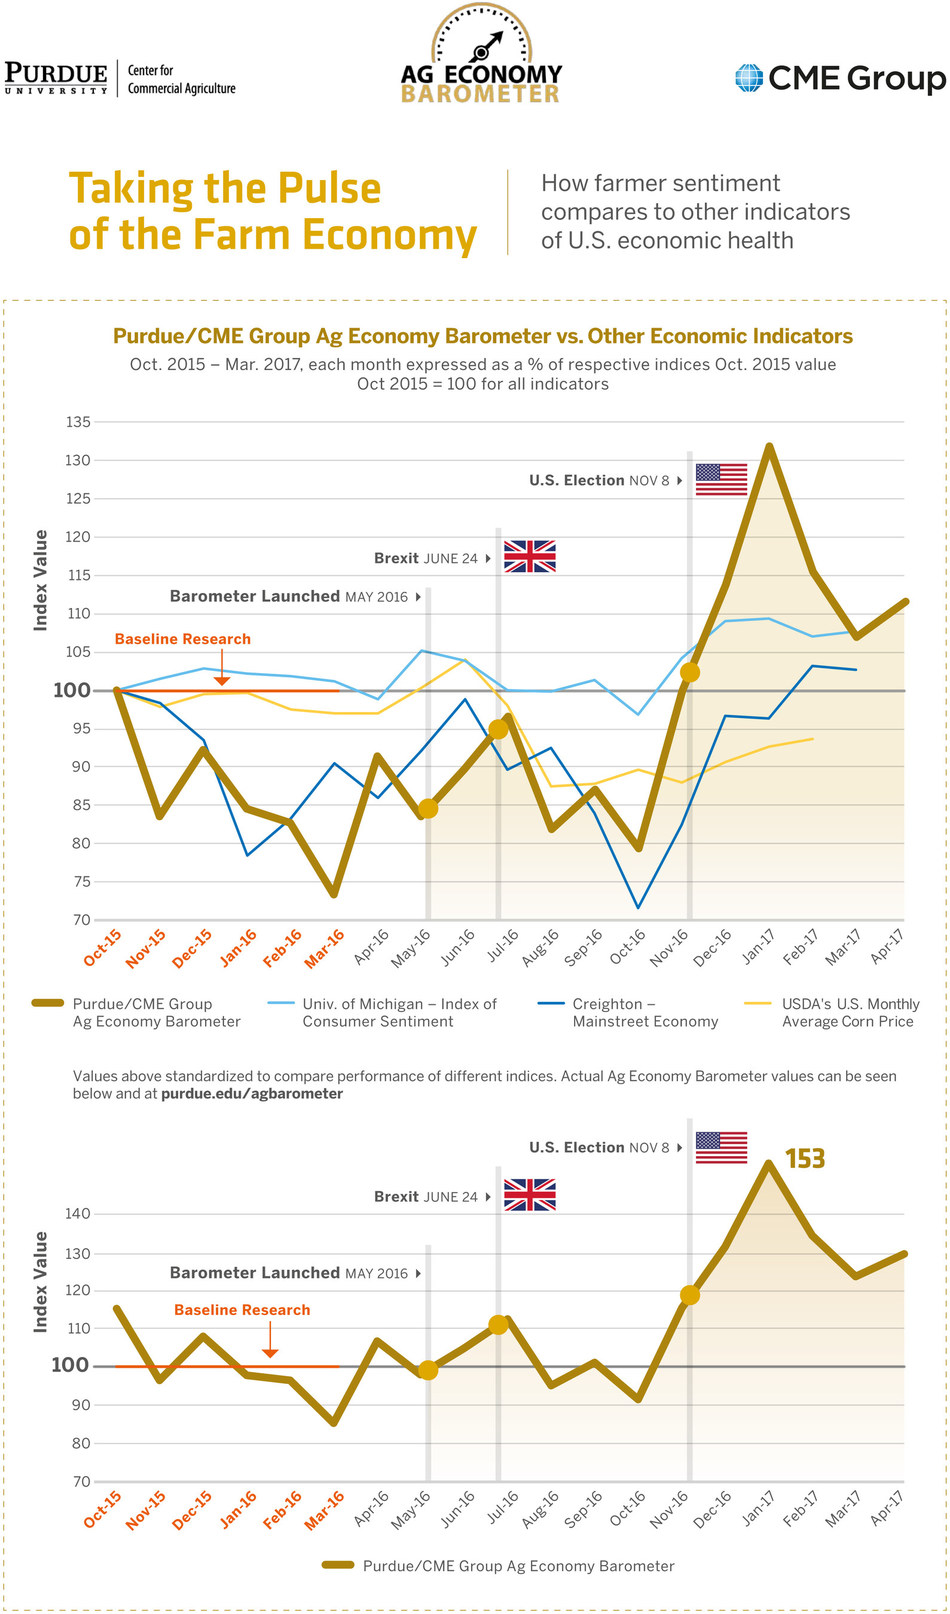 Taking the pulse of the farm economy: This infographic shows how farmer sentiment compares to other indicators of U.S. economic health. (Purdue/CME Group Ag Economy Barometer) A publication-quality photo is available at https://news.uns.purdue.edu/images/2017/june-agbarometer.jpg.